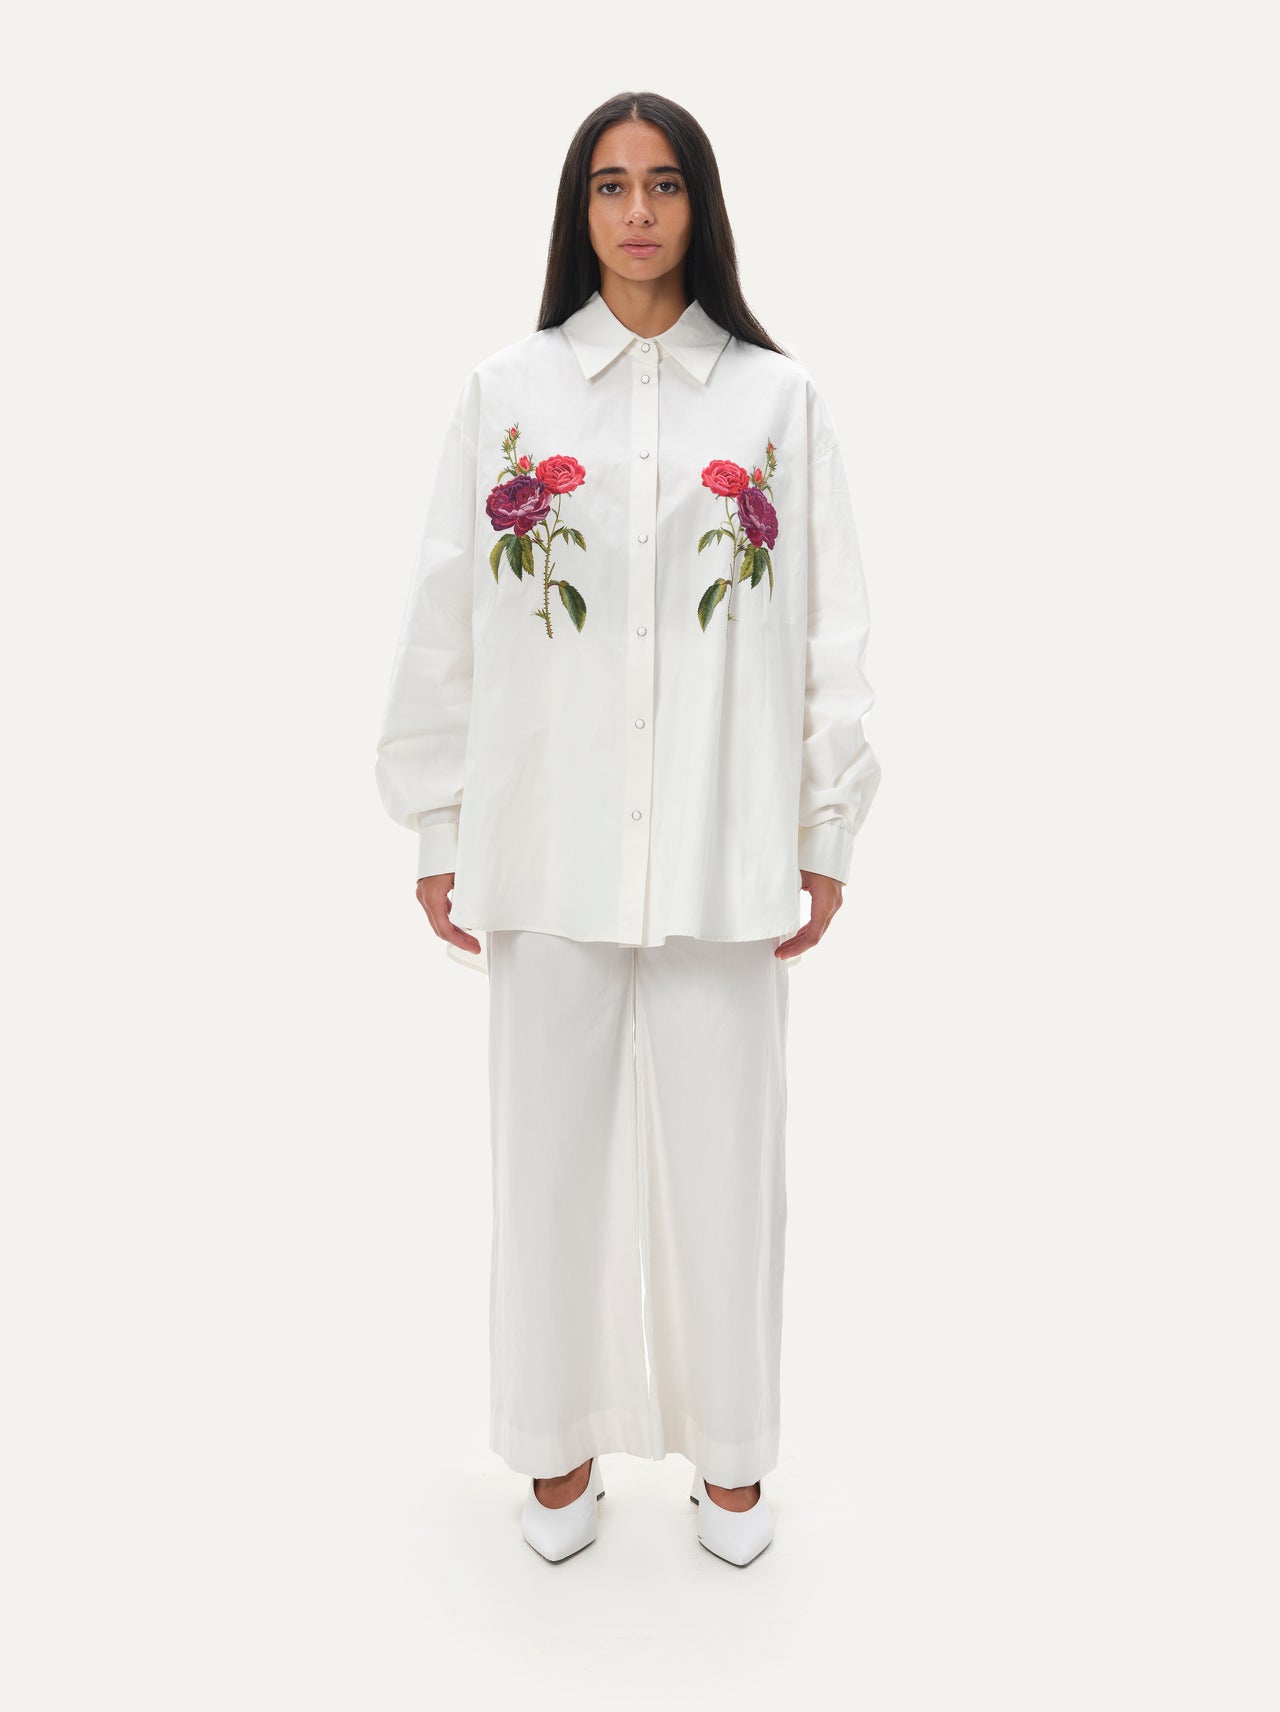 White on white co-ord - Floral embroidered